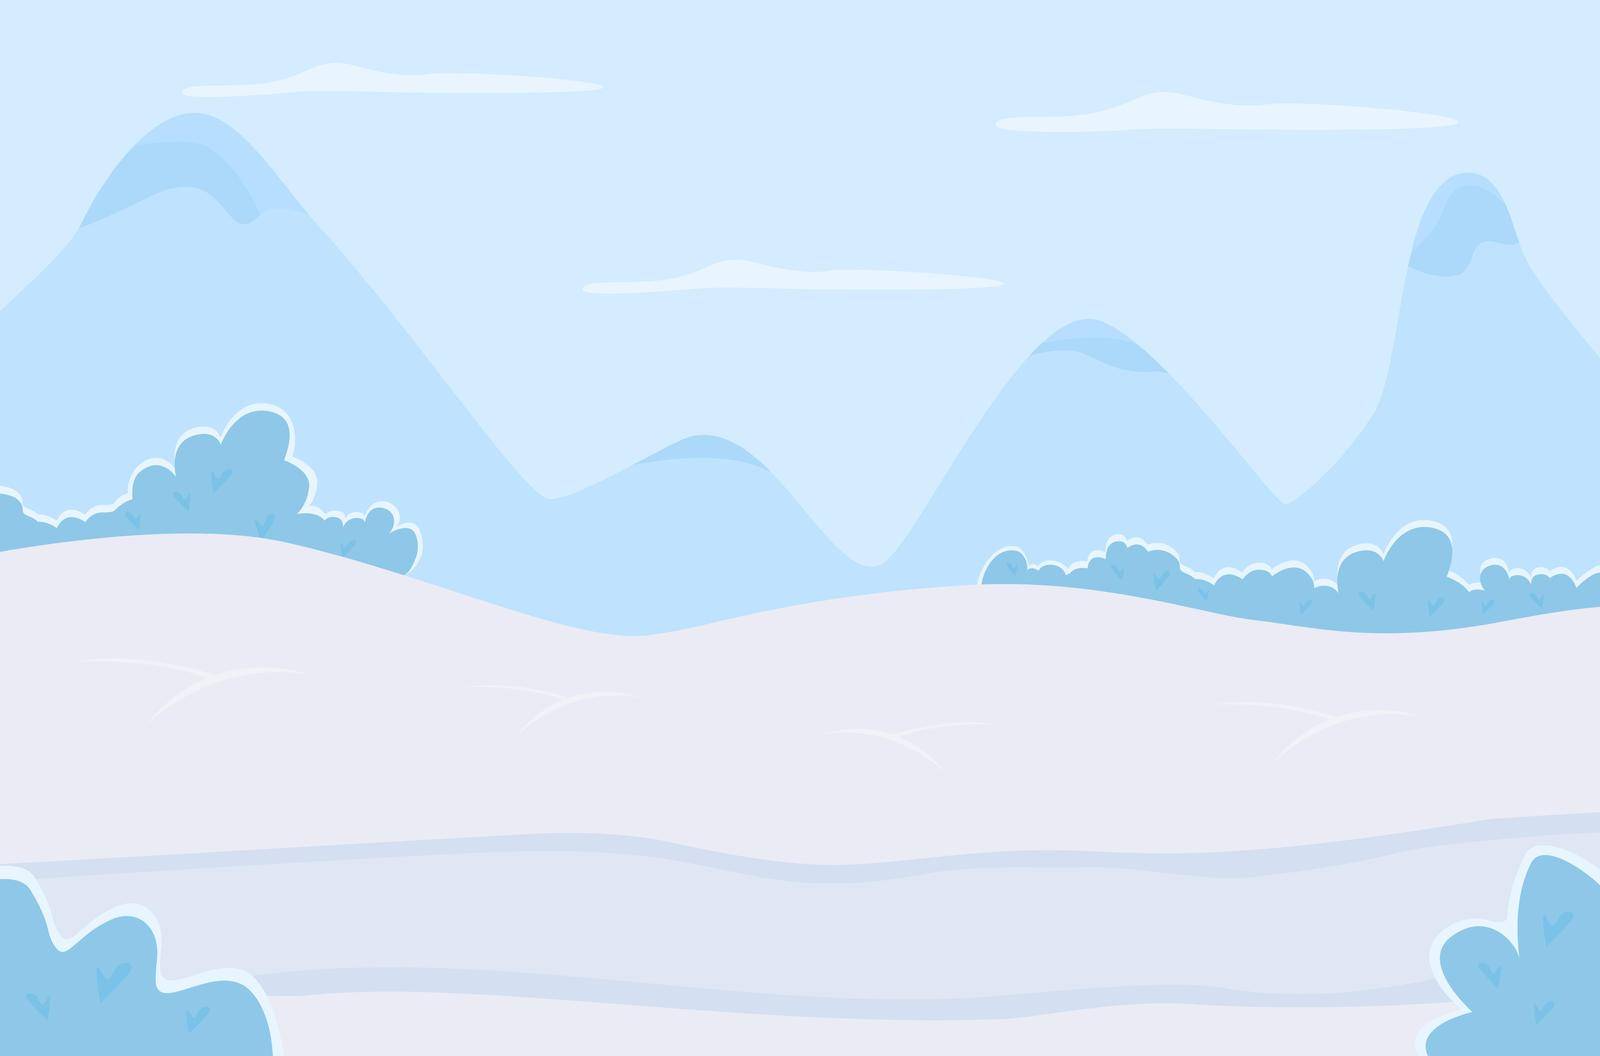 Morning in winter mountains flat color vector illustration. Scenic frozen land during daytime. Snow on wintry hills. Panoramic 2D cartoon landscape with ridges and peaks on background